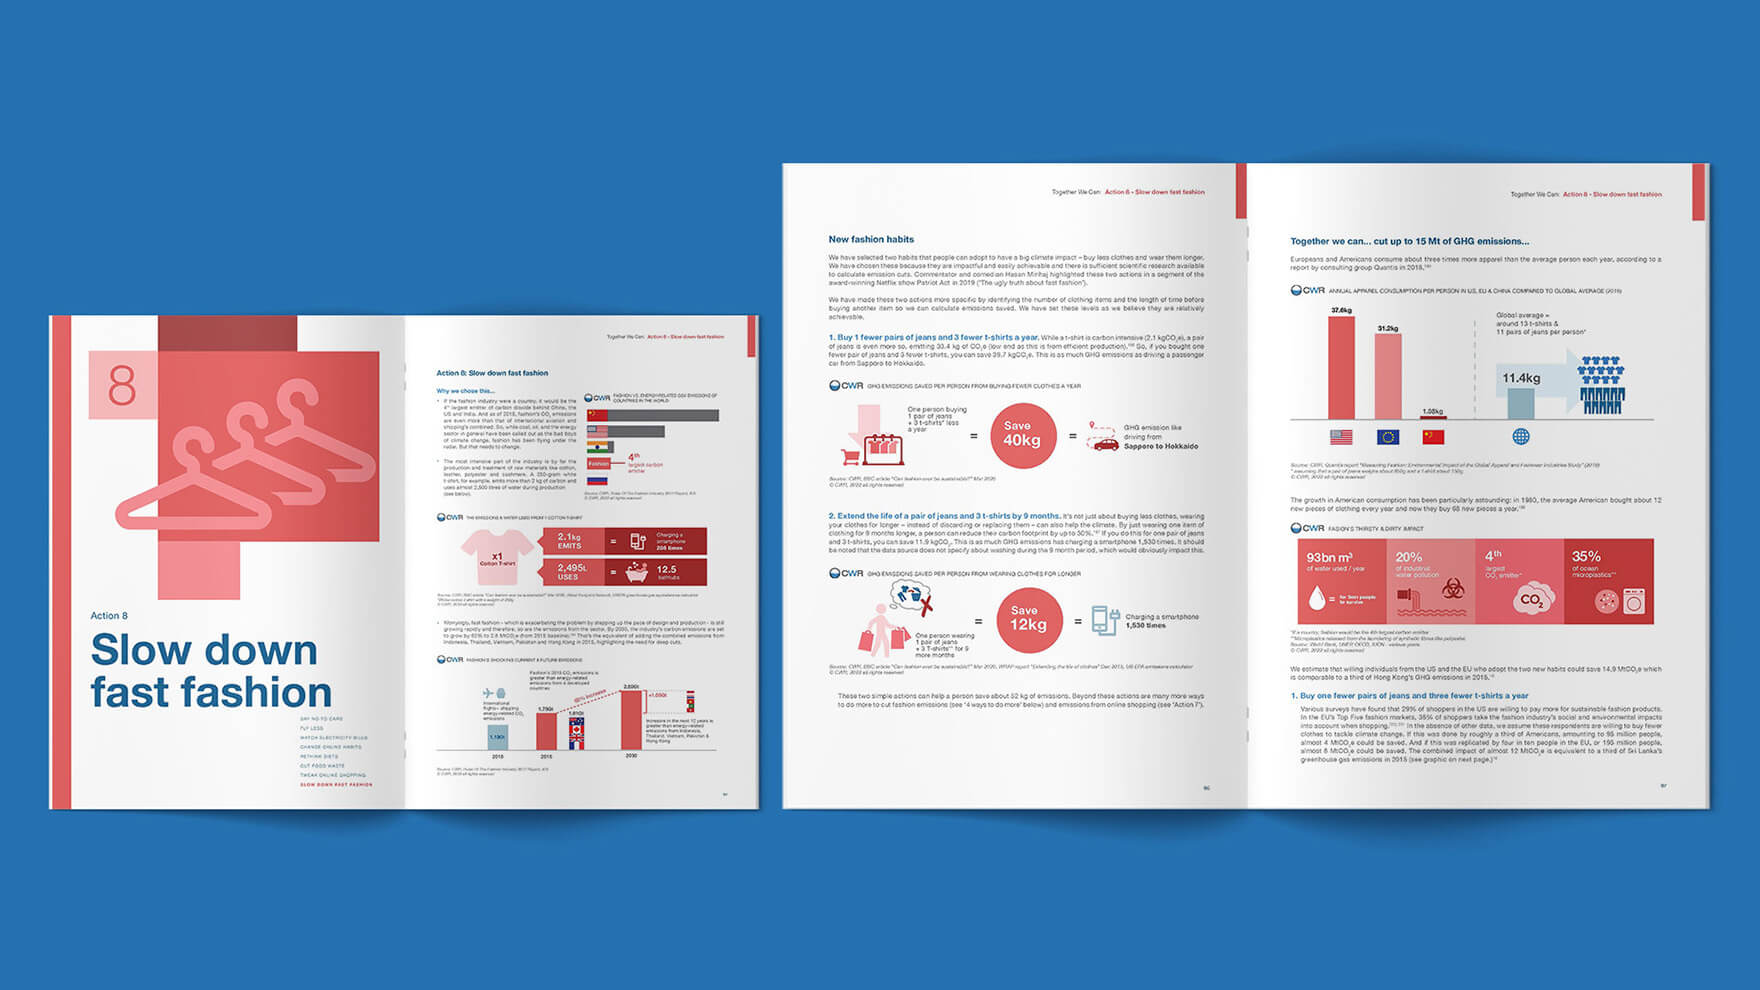 Branding Agency Hong Kong_ChinaWaterRisk_TogetherWeCan_Research report design_CheddarMedia_5_1760